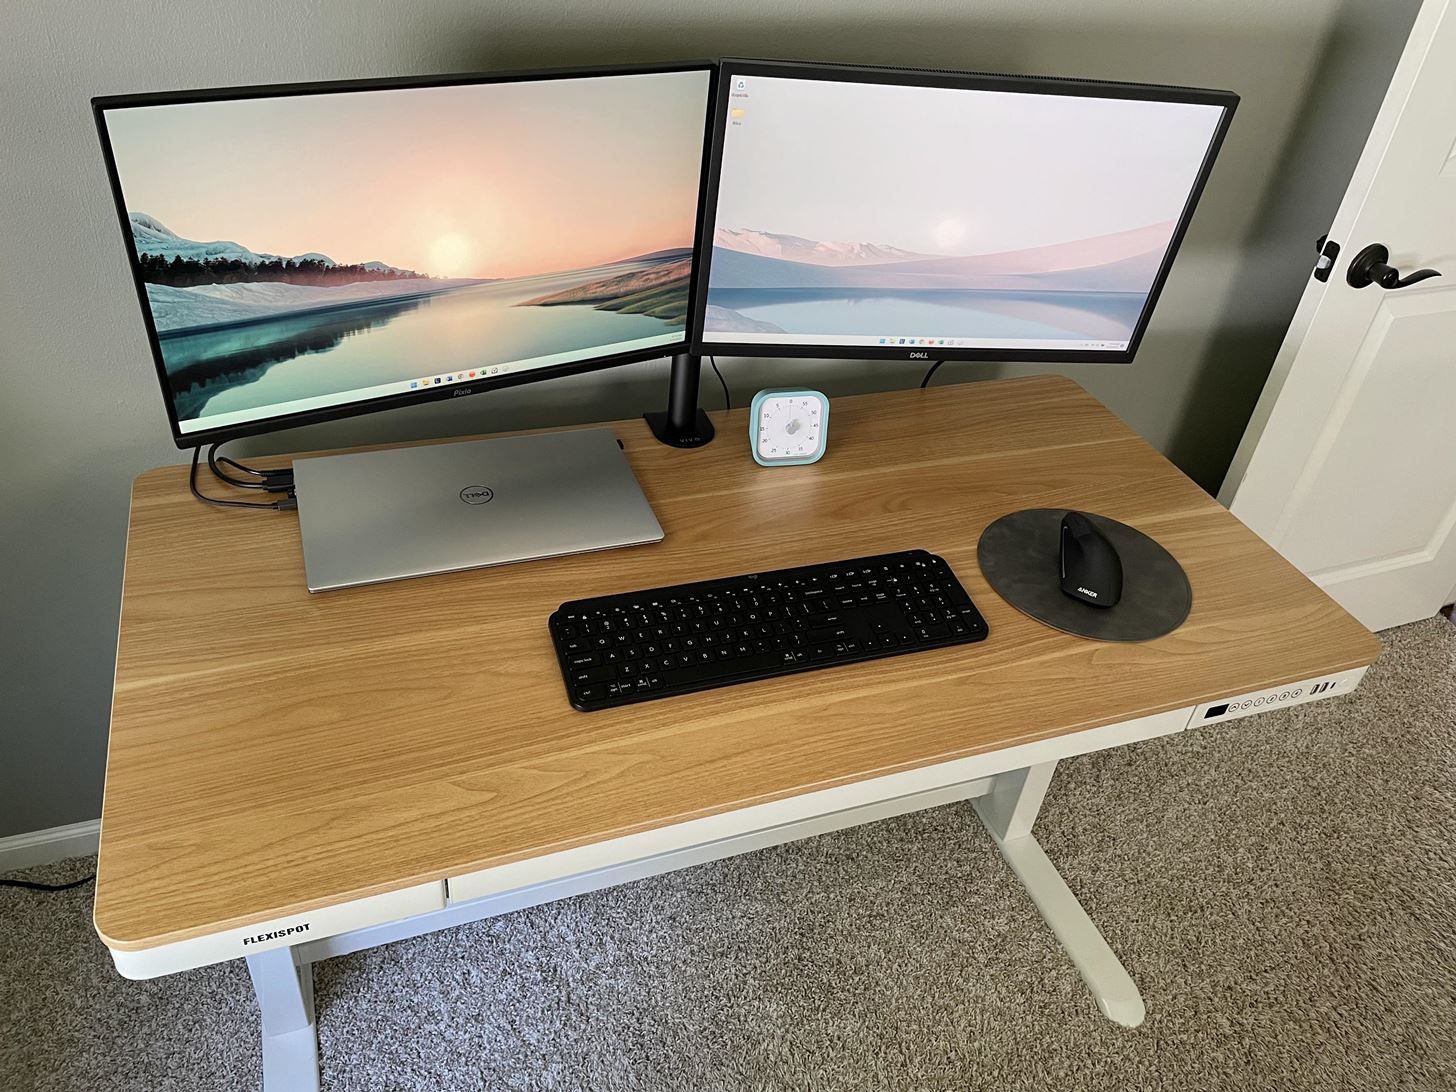 The Flexispot E7 Pro Plus Electric Standing Desk Is Great for Any Home Office